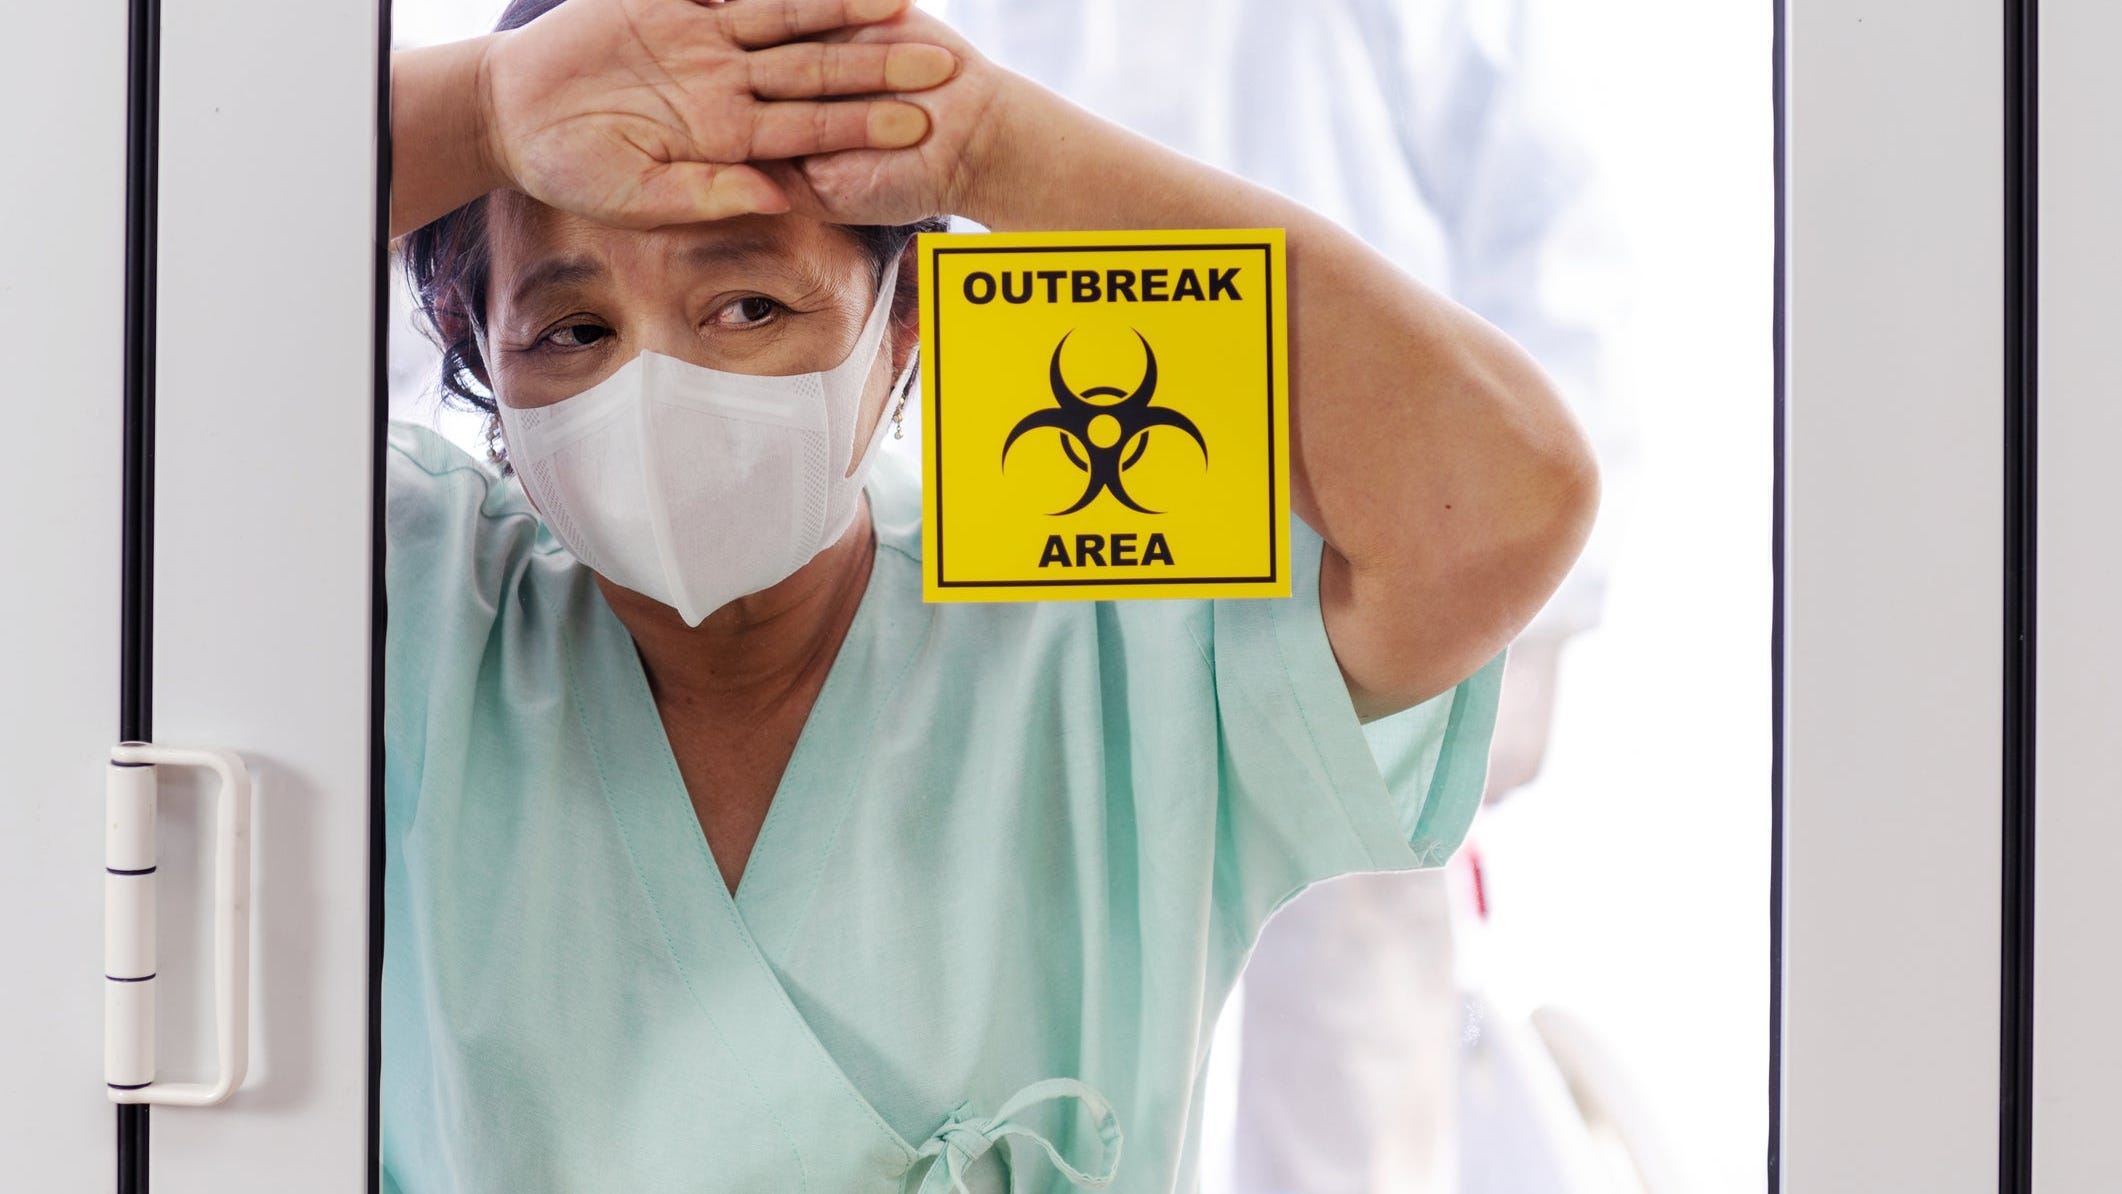 Elective surgeries continue at some US hospitals during coronavirus outbreak despite supply and safety worries